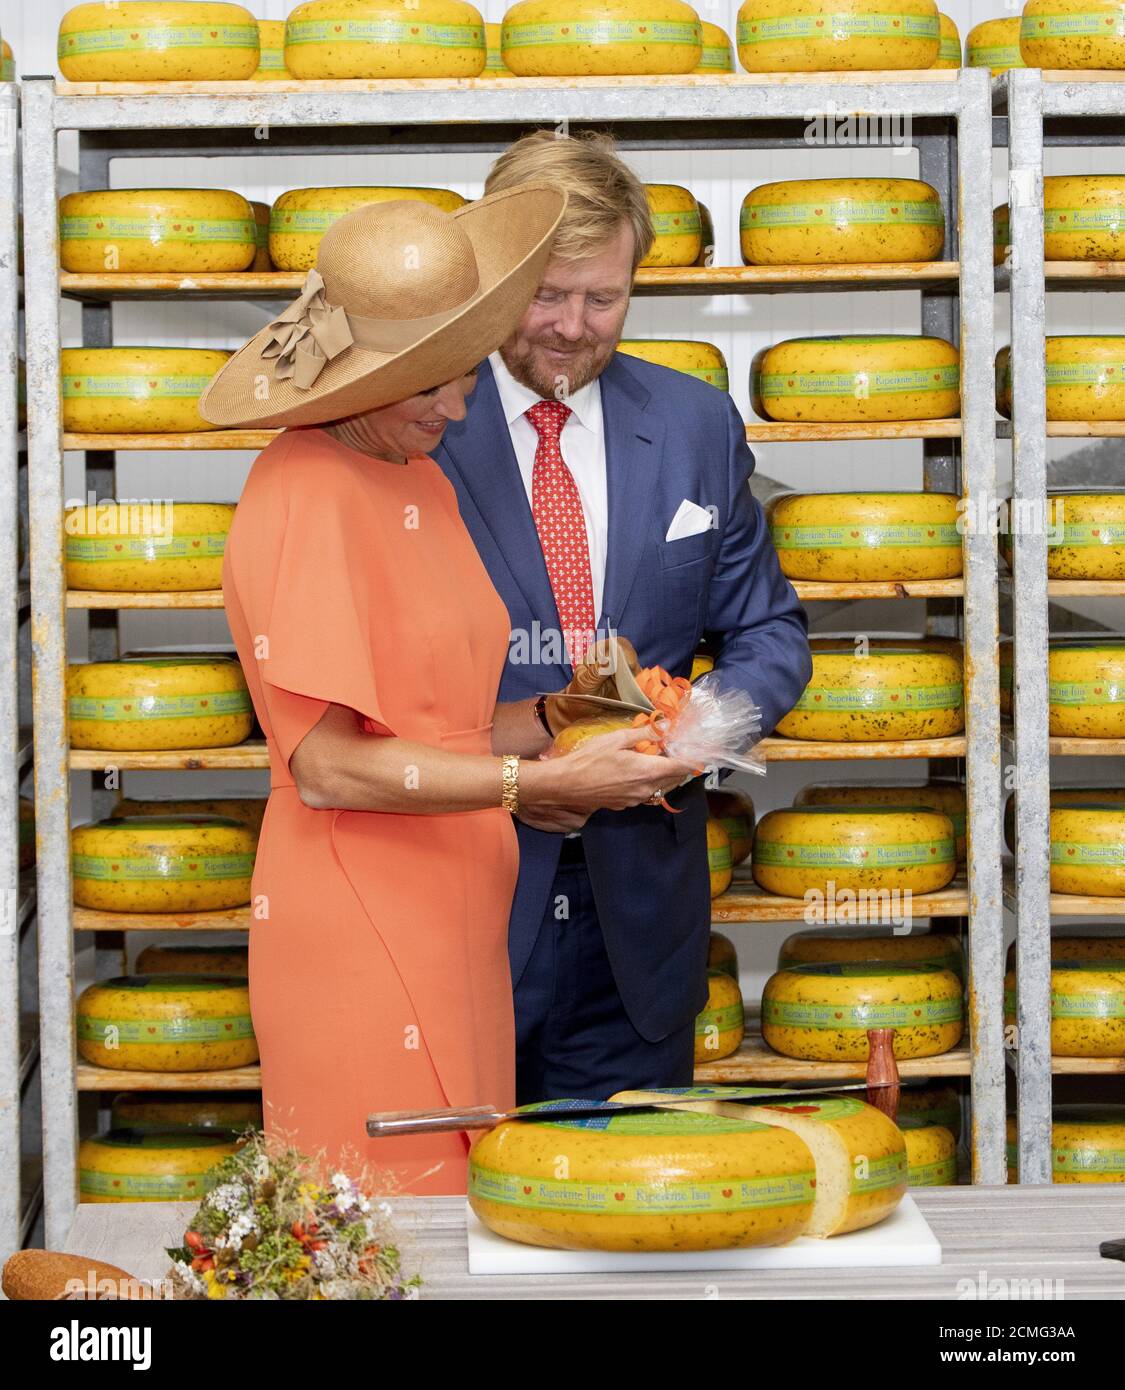 Tijnje, Netherlands. 17th Sep, 2020. King Willem-Alexander and Queen Maxima of The Netherlands at Kaasboerderij De Deelen in Tijnje, on September 17, 2020, this sustainable cheese farm is located in the De Deelen nature reserve, for a a regional visit to Southeast Friesland, the visit is about sustainability, the future of agriculture and the Fryske language and cultureCredit: Albert Nieboer/ Netherlands OUT/Point De Vue Out |/dpa/Alamy Live News Stock Photo